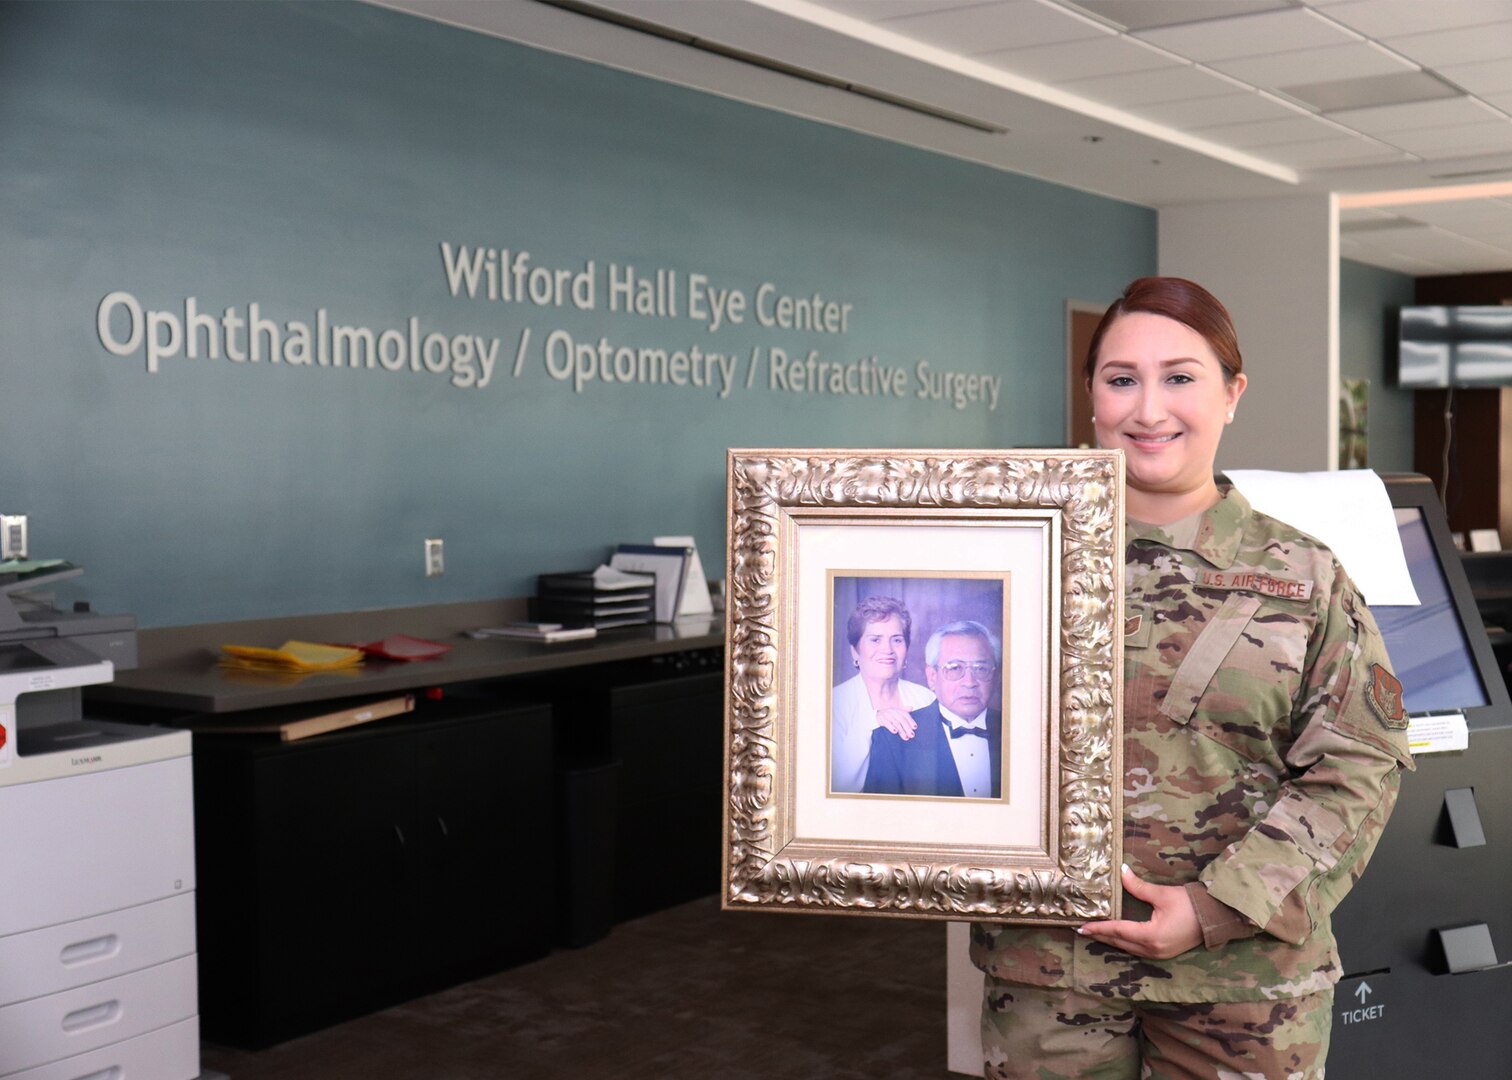 Tech. Sgt. Christine R. Narro, 433rd Aerospace Medicine Squadron, an enlisted Reserve Citizen Airman with the 433rd Airlift Wing at Joint Base San Antonio–Lackland, Texas, holds a picture frame of her grandfather, Felix Gonzalez and grandmother, Josefina, in the lobby of Wilford Hall Eye Center. This is the location where she works as an Optometry Technician during her Unit Training Assemblies on her weekend duty.  (U.S. Air Force photo by Tech. Sgt. Iram Carmona)